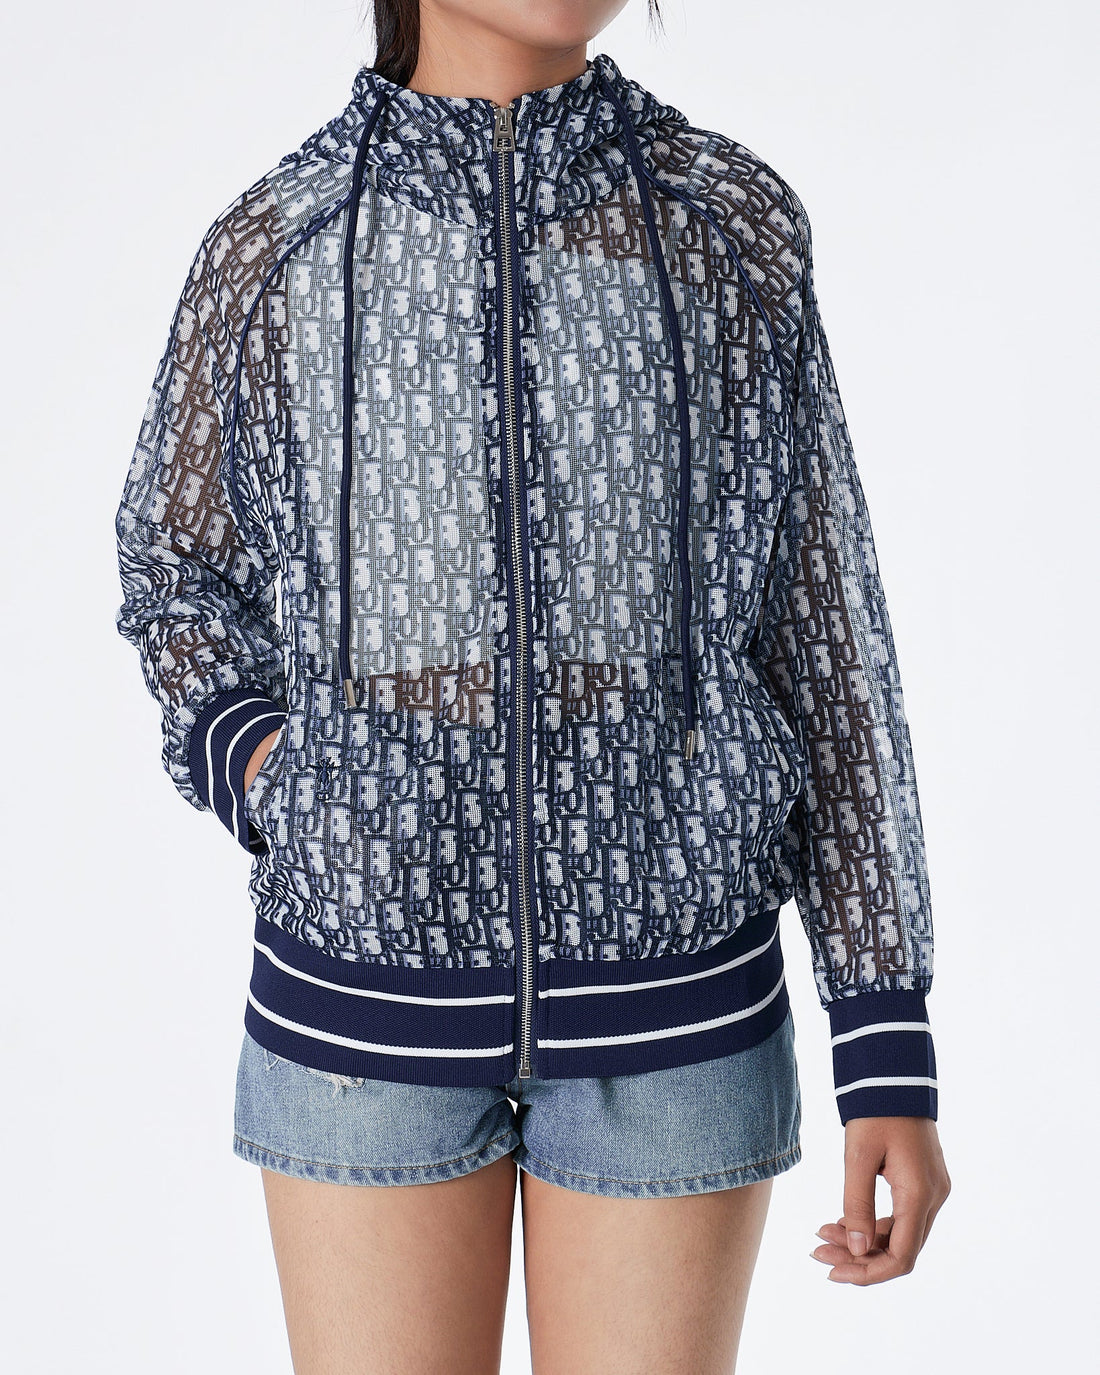 MOI OUTFIT-CD Monogram Lady Blue Jacket 74.90